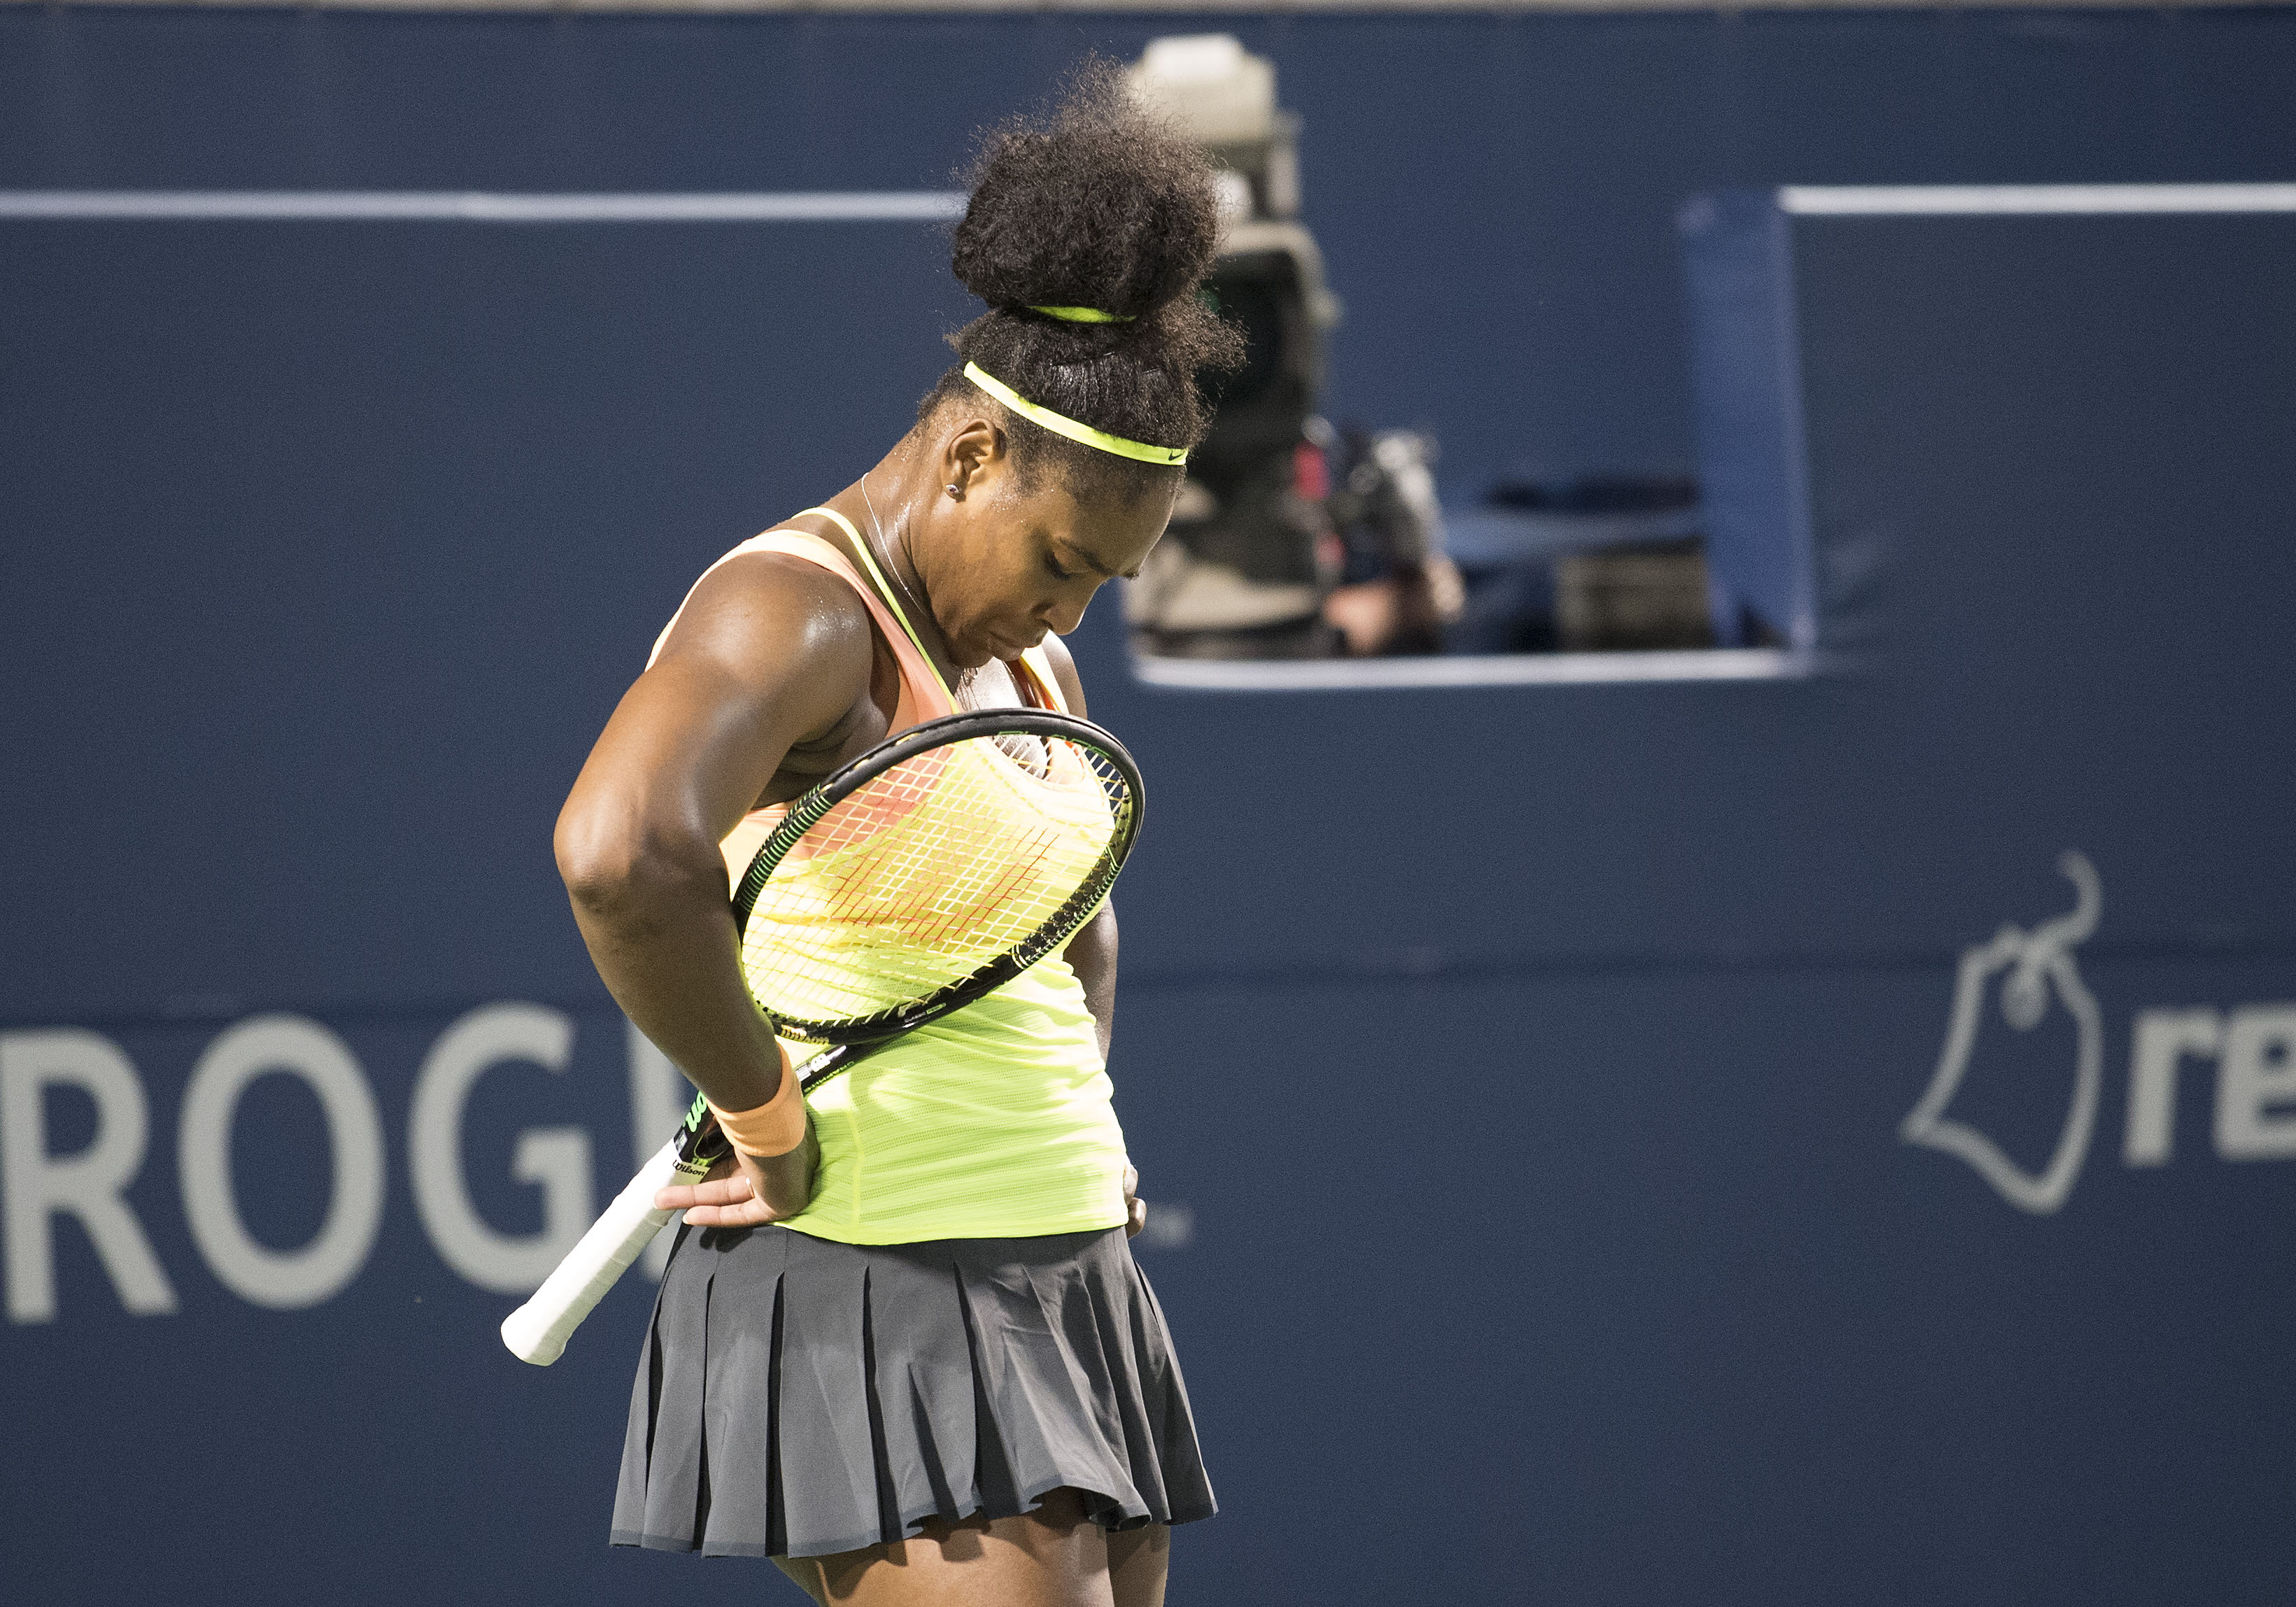 Aug 15, 2015; Toronto, Ontario, Canada; Serena Williams of the USA reacts in her semi final match against Belinda Bencic of Switzerland (not pictured) during the Rogers Cup tennis tournament at the Aviva Centre. Belinda Bencic won 3-6 7-5 6-4. Mandatory Credit: Nick Turchiaro-USA TODAY Sports